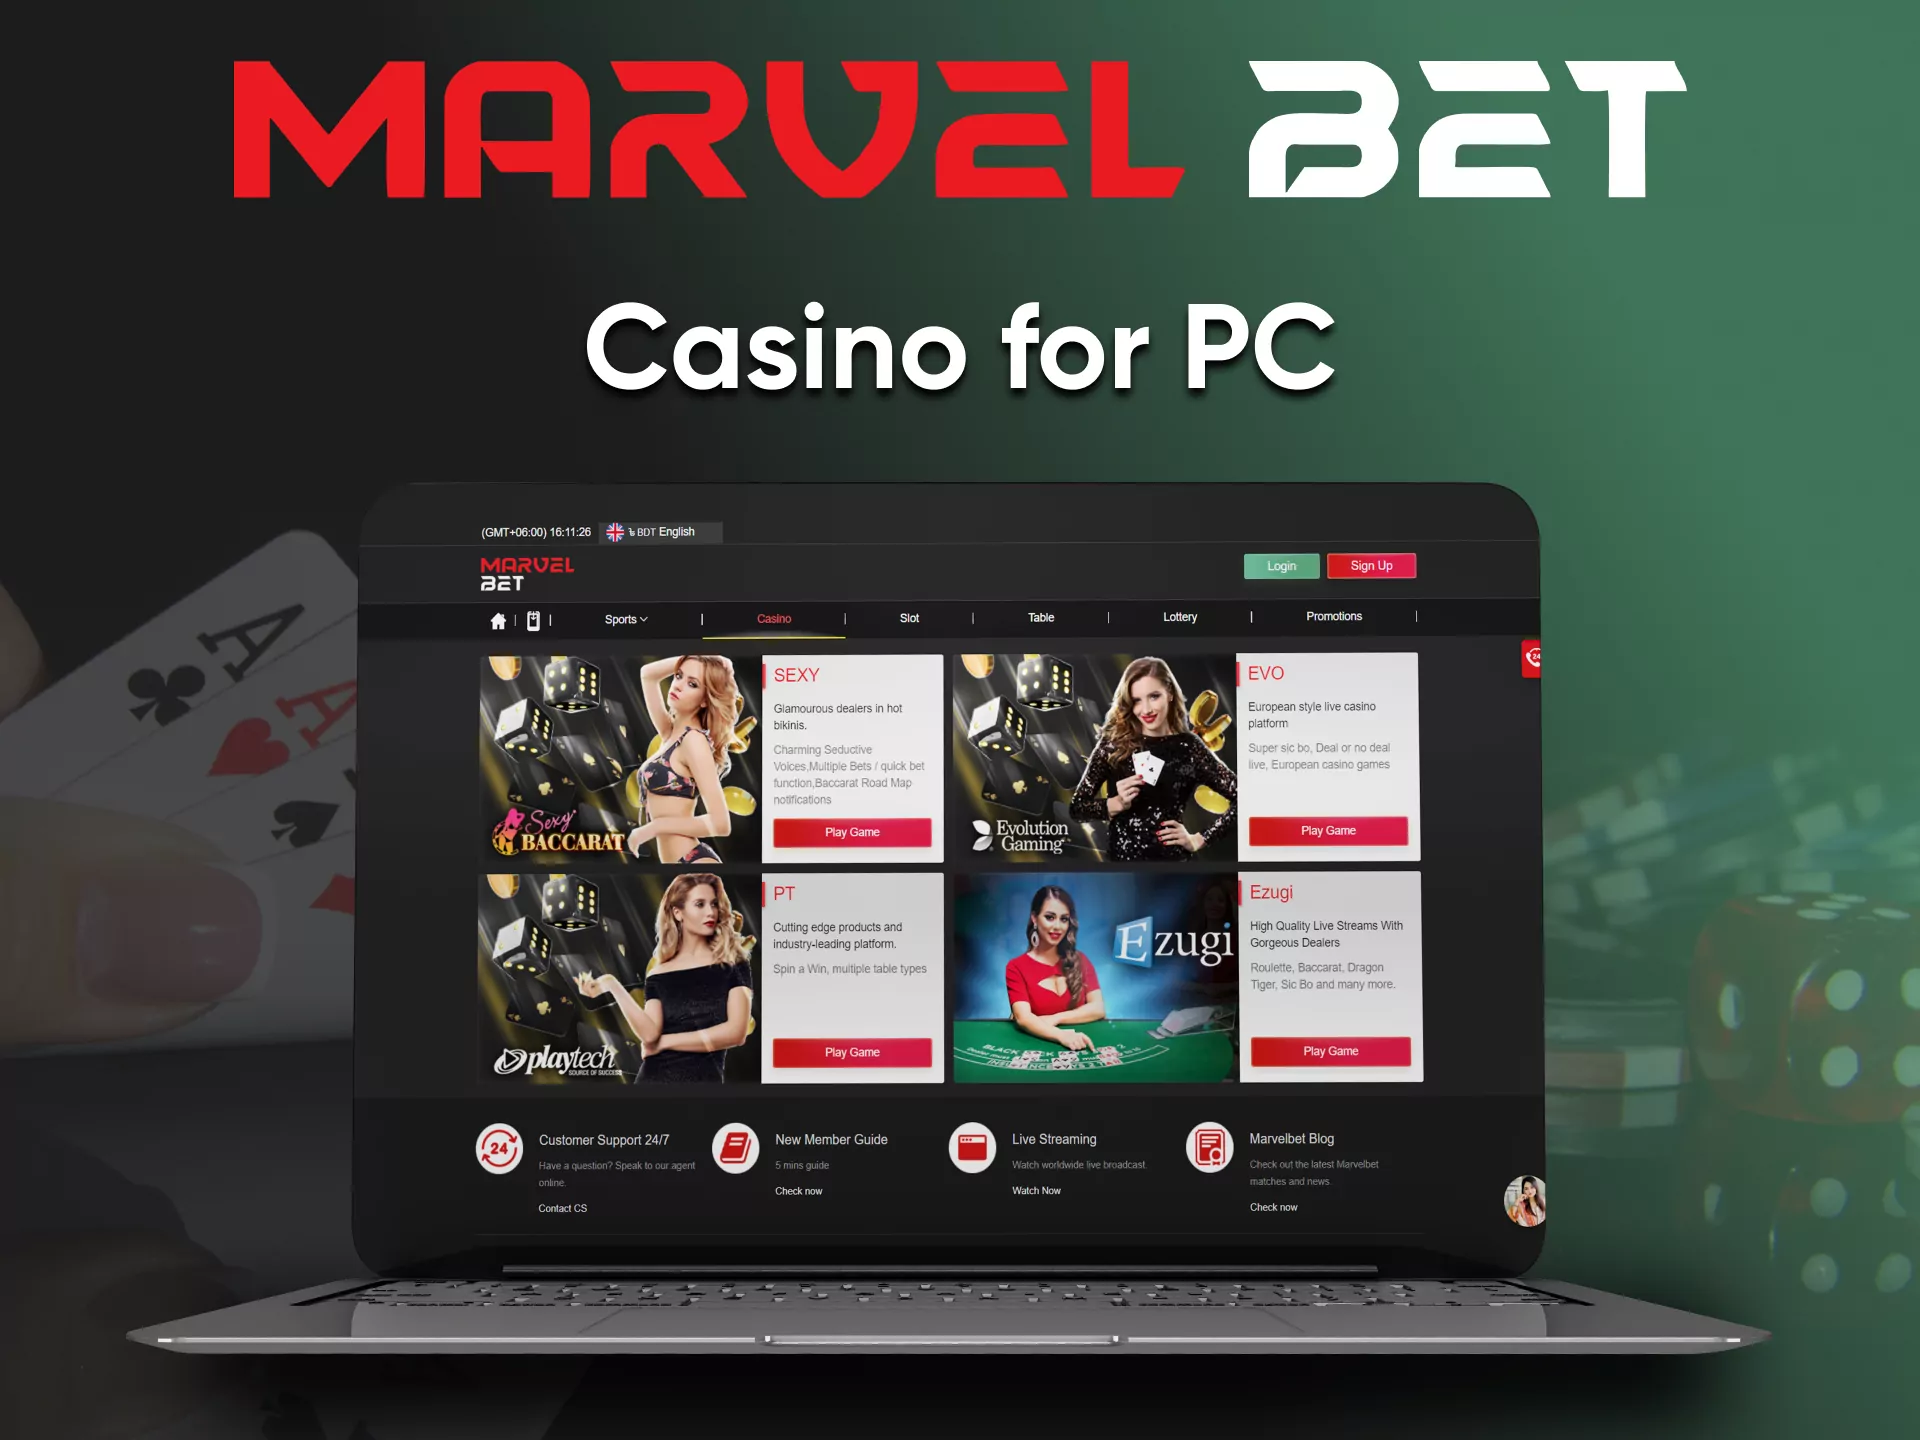 Visit the casino site from Marvelbet.